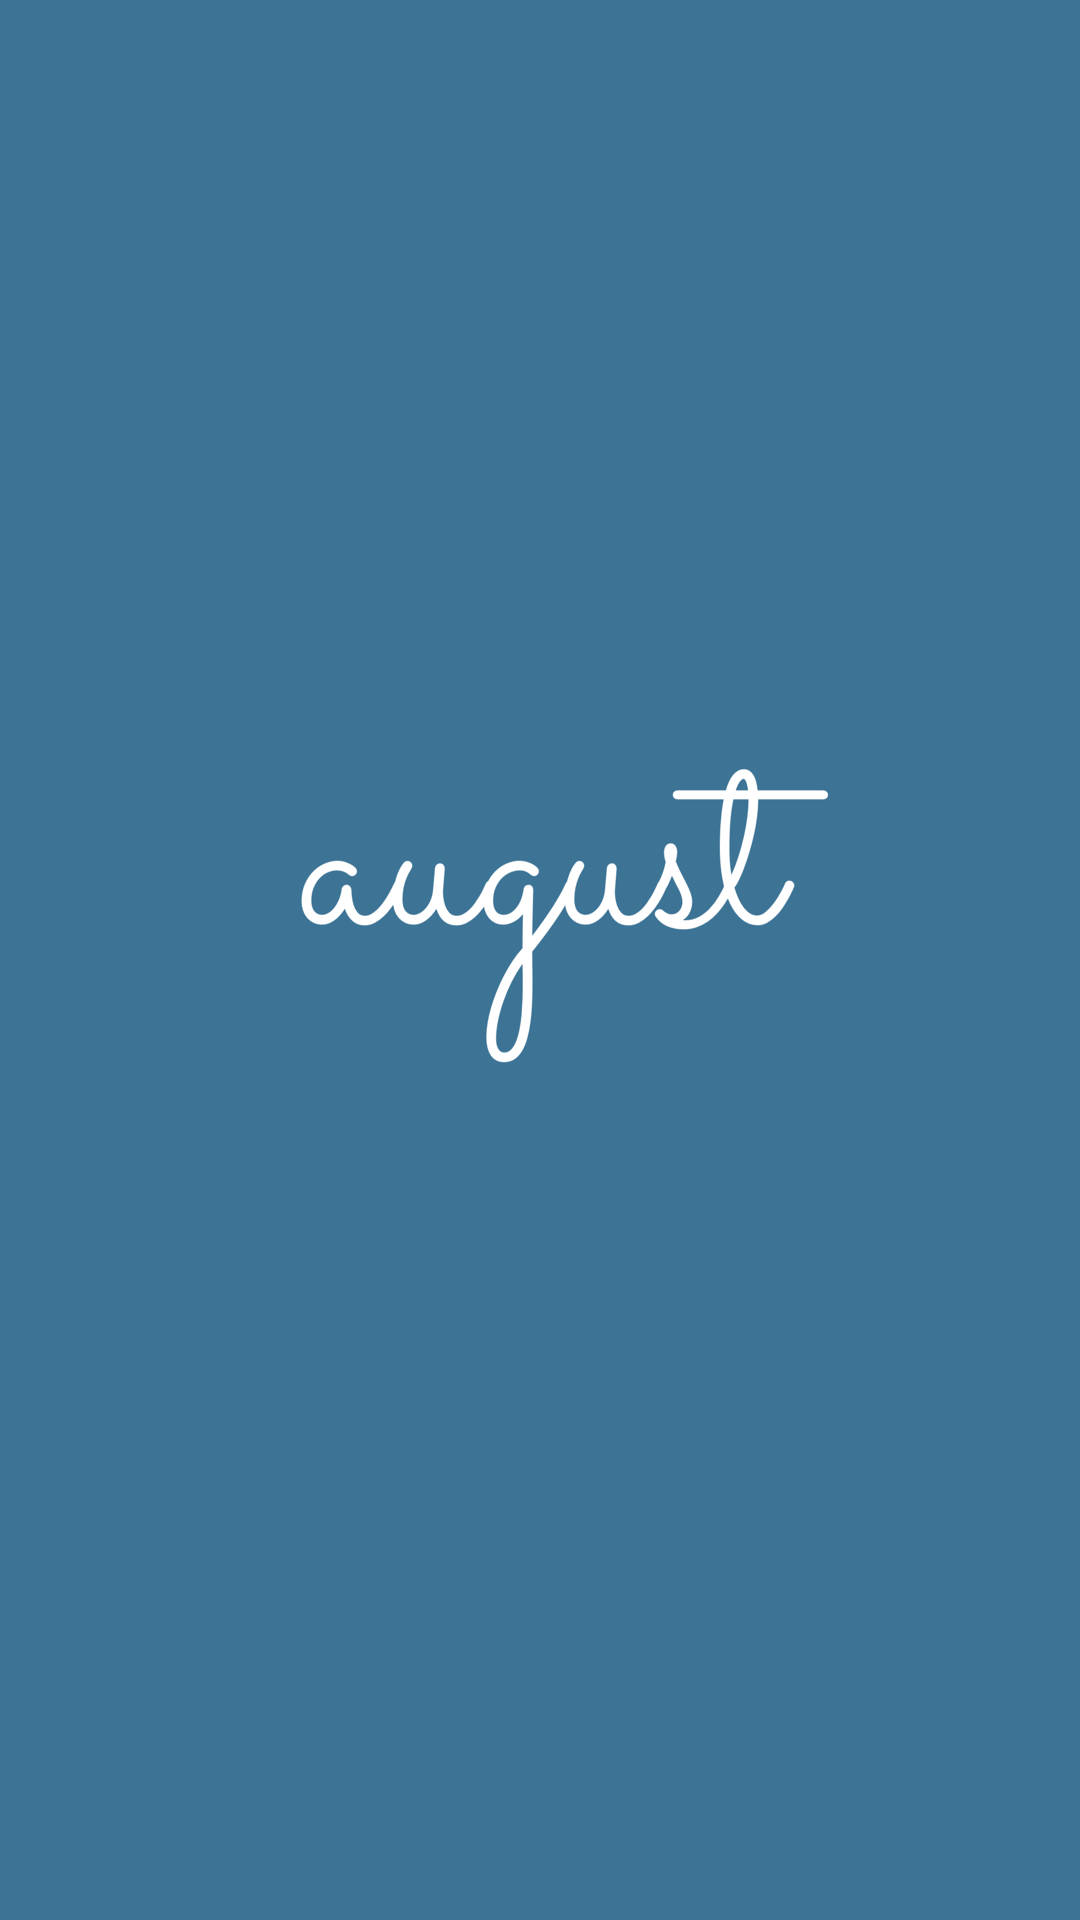 Celebrate August with a Blue Minimalist Background Wallpaper